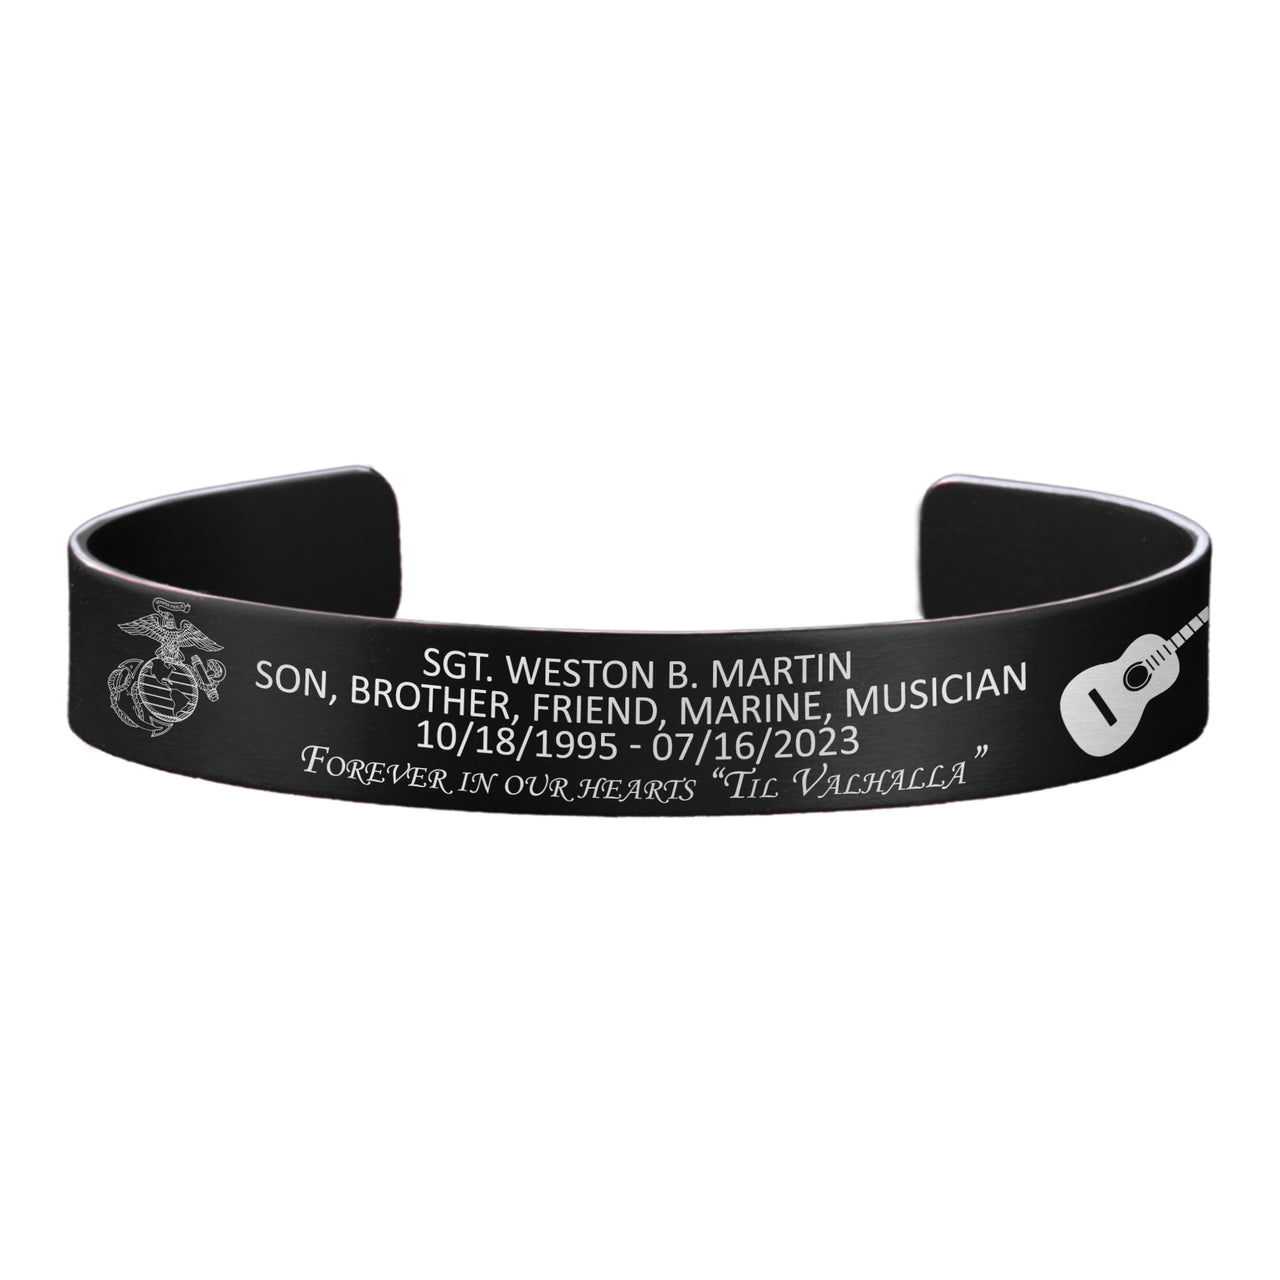 SGT Weston B. Martin Memorial Band – Hosted by the Martin Family